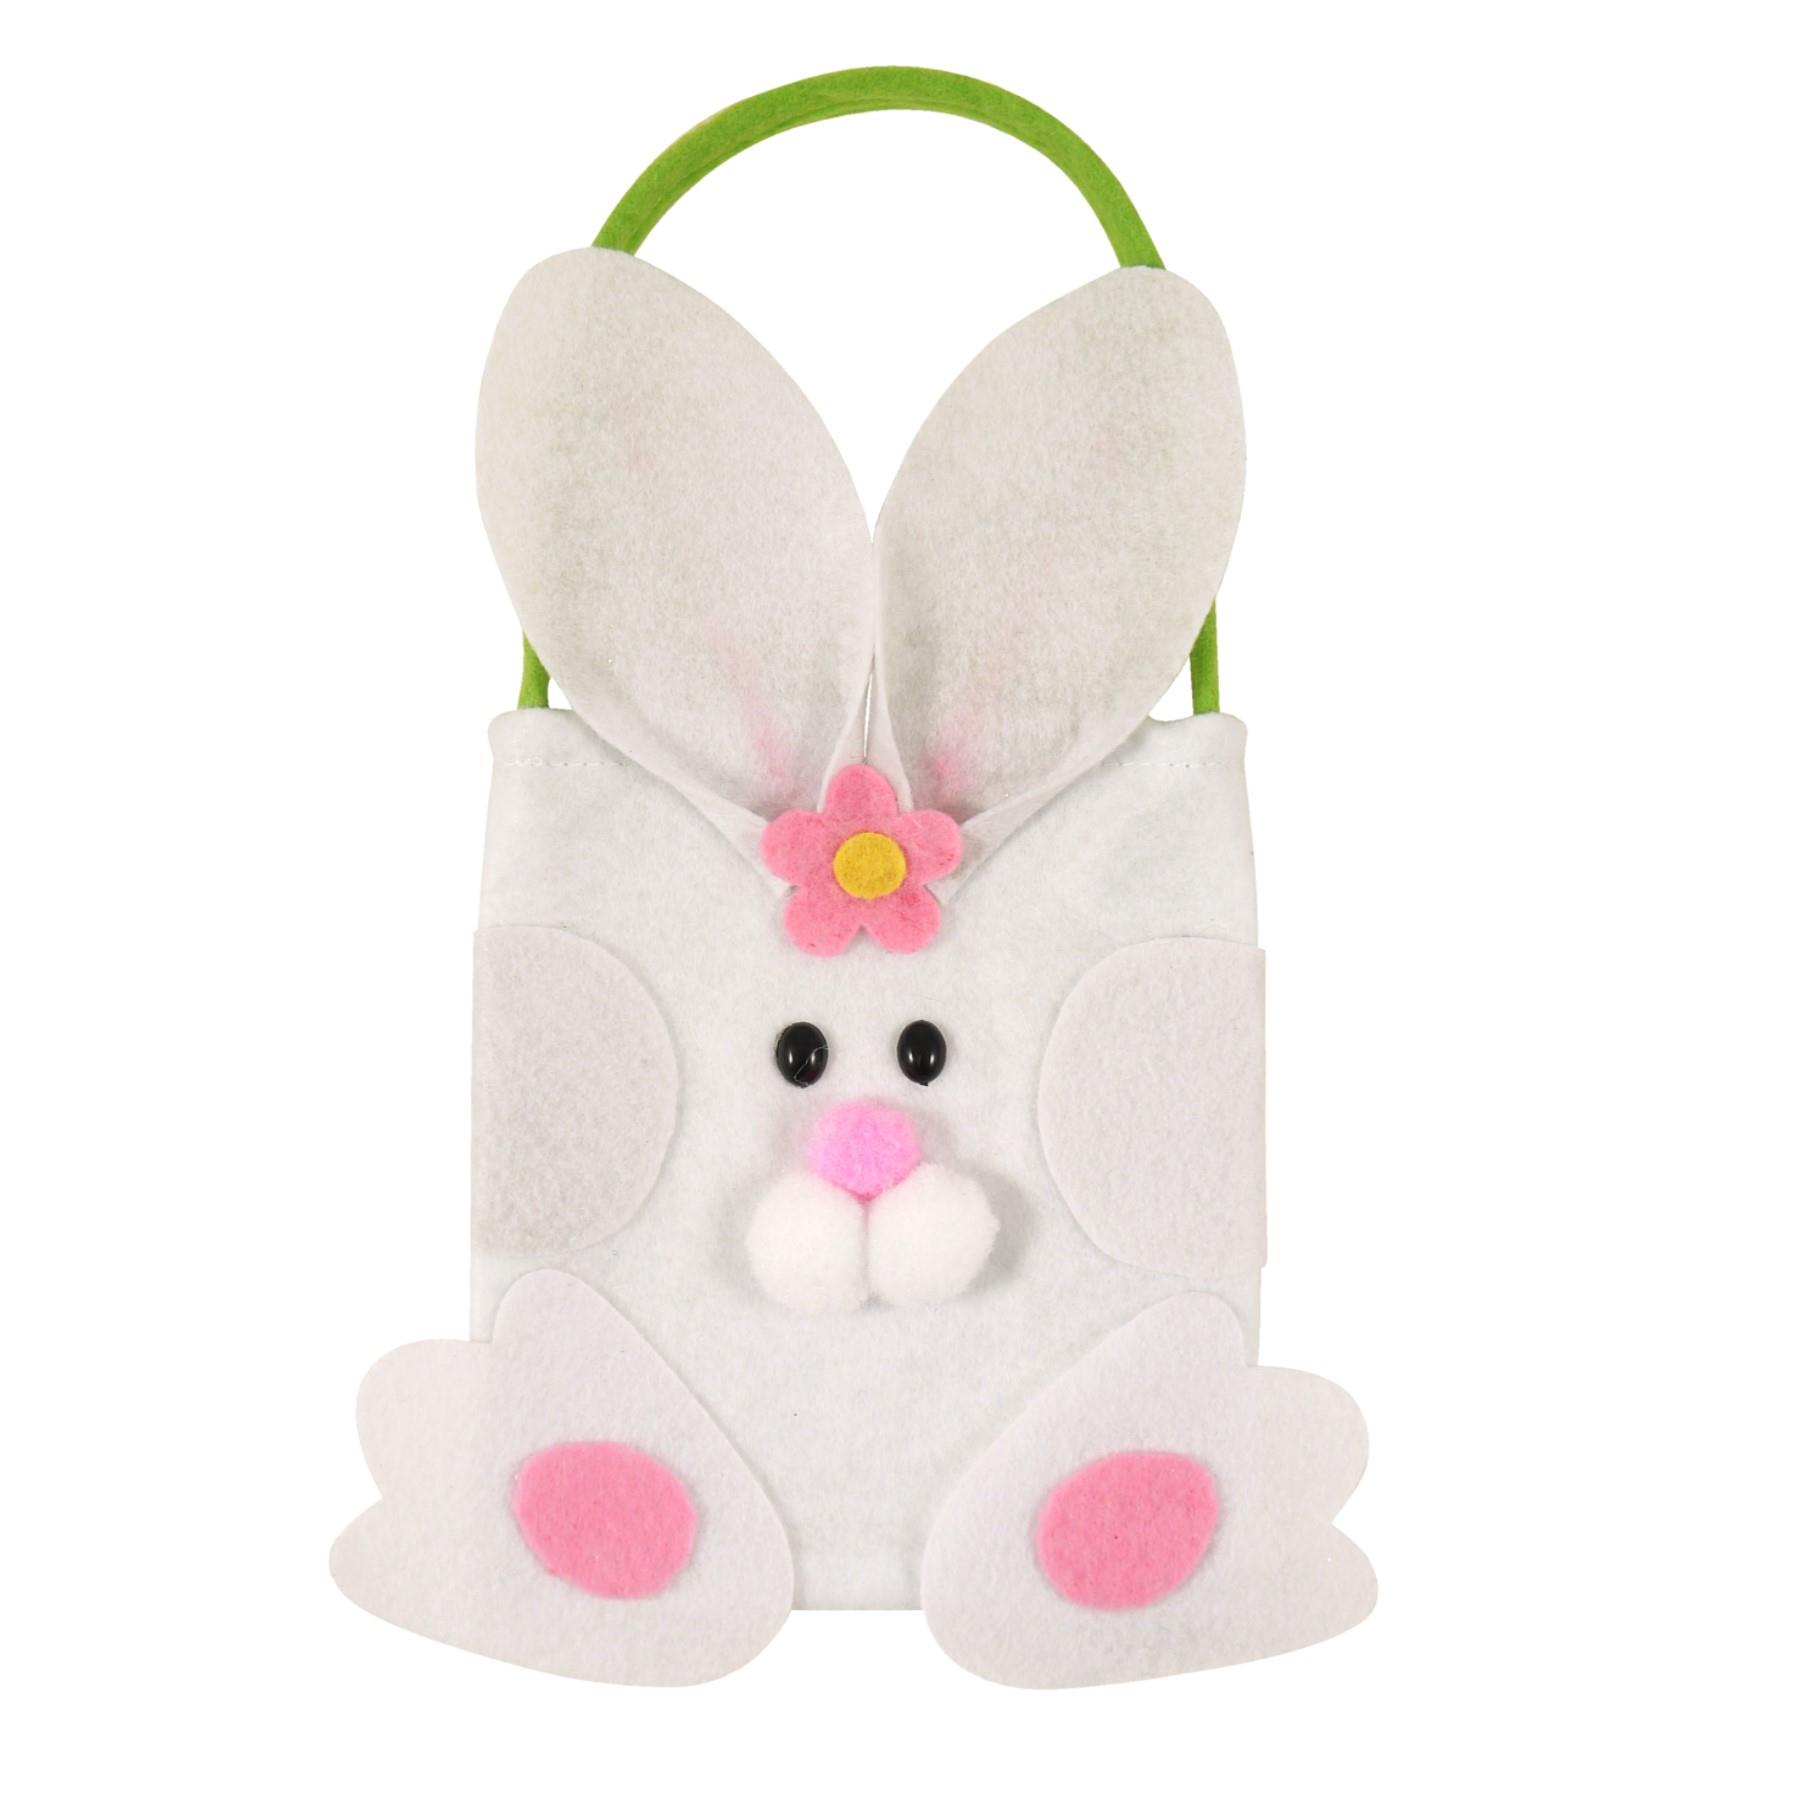 Easter Baskets, Buckets, Accessories - Felt Bag / White Bunny